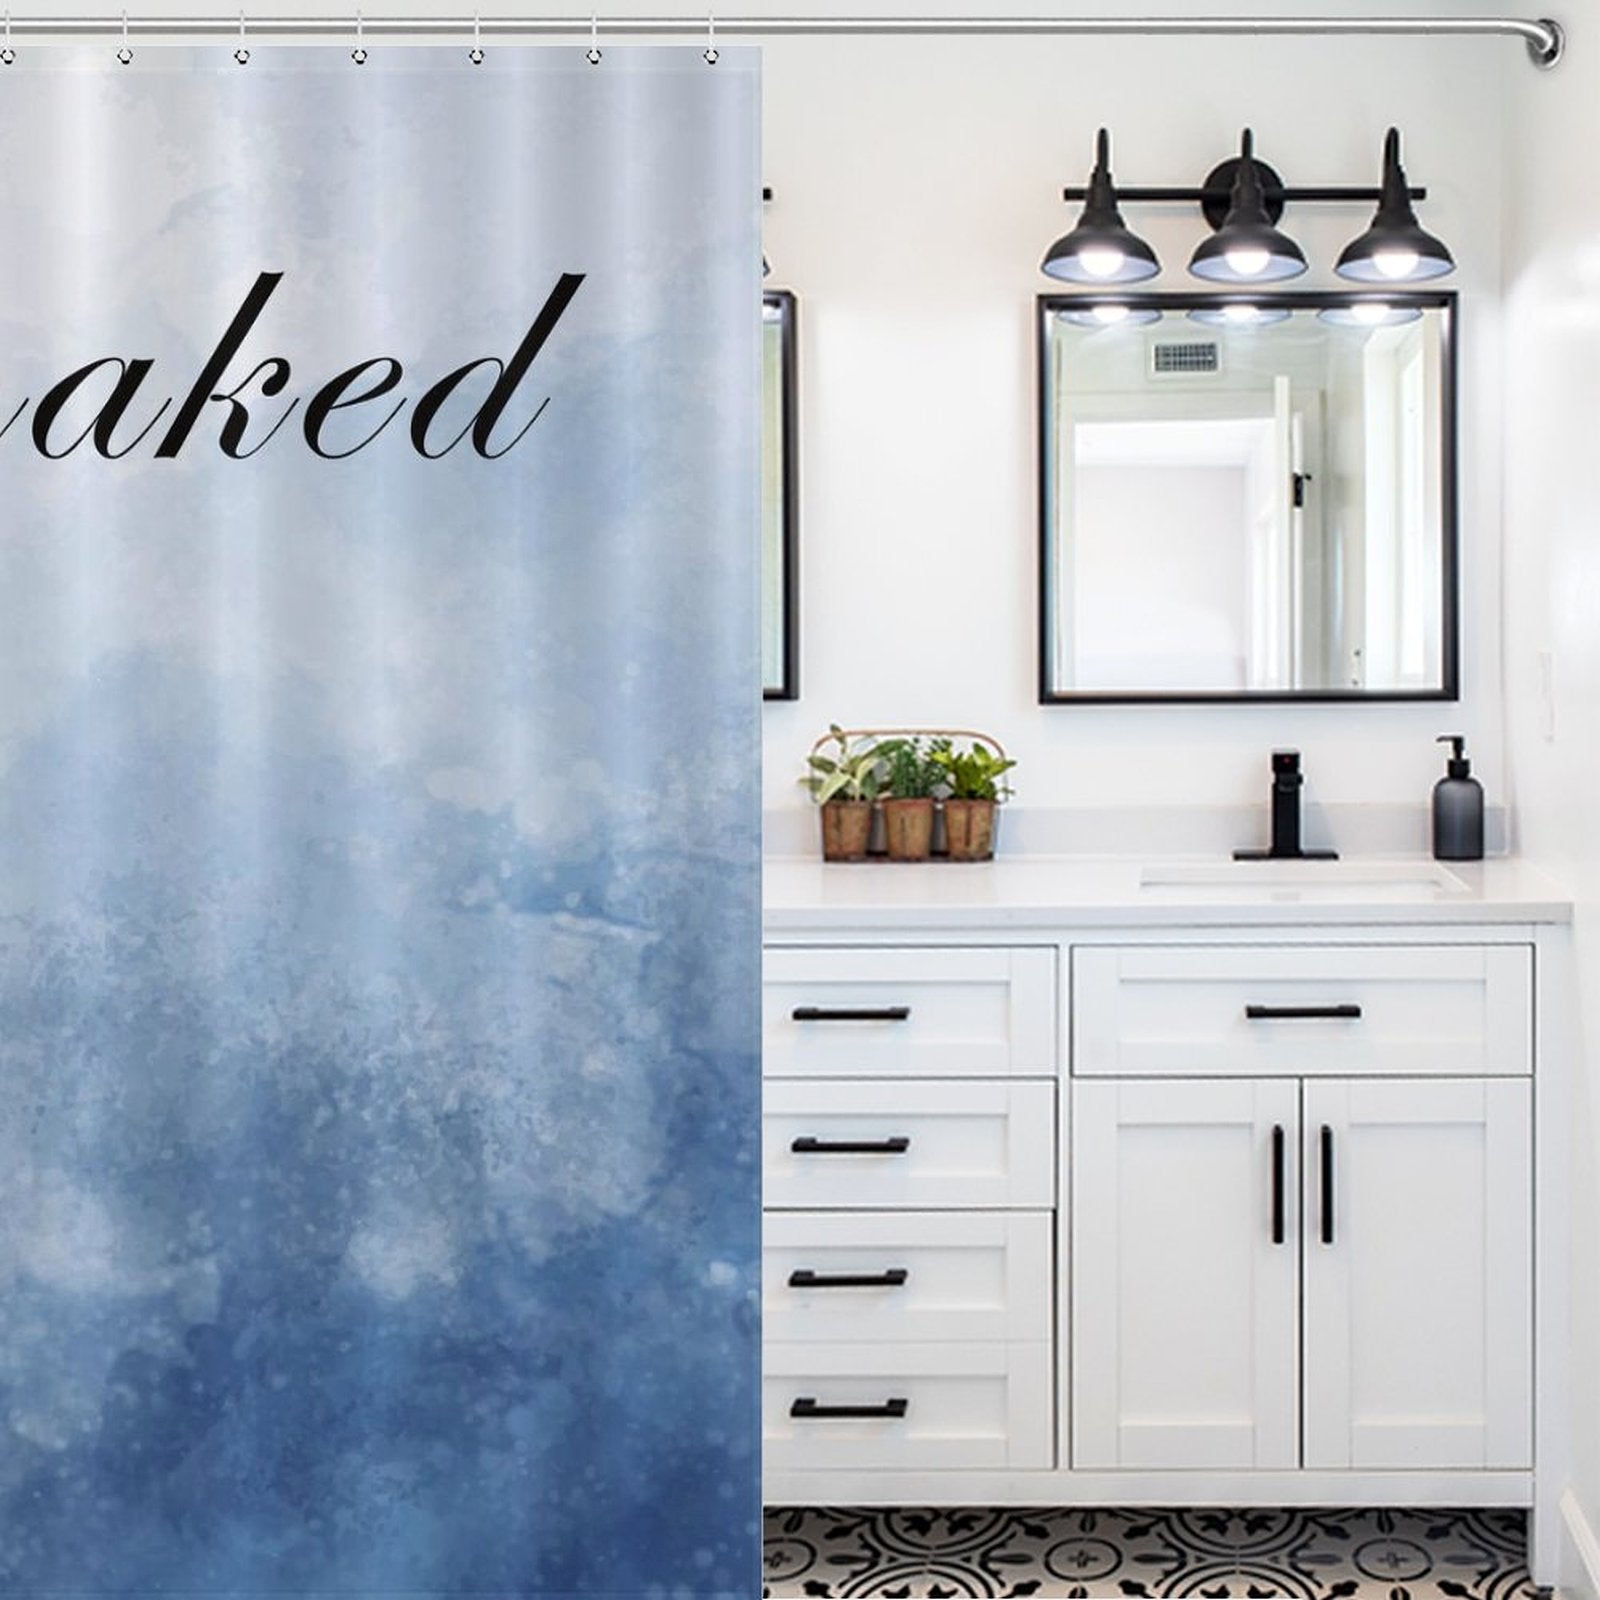 A bathroom with white cabinets, black hardware, a sink, and a large mirror with three lights above. A Funny Letters Abstract Blue Get Naked Shower Curtain-Cottoncat by Cotton Cat is partially visible on the left, adding a playful touch with its text in bold letters.